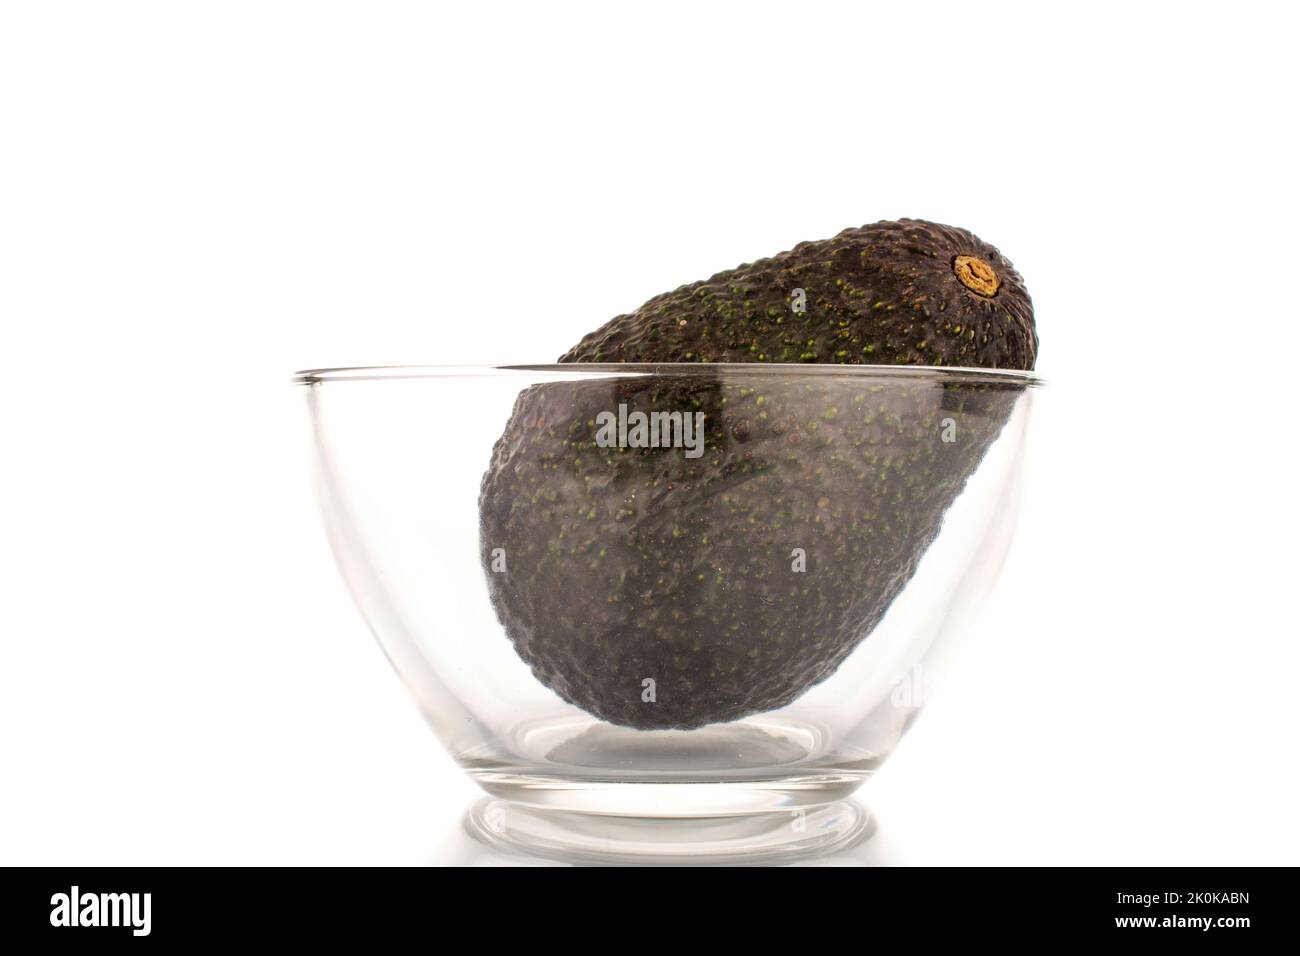 One ripe organic avocado in a glass bowl, close-up, isolated on a white background. Stock Photo